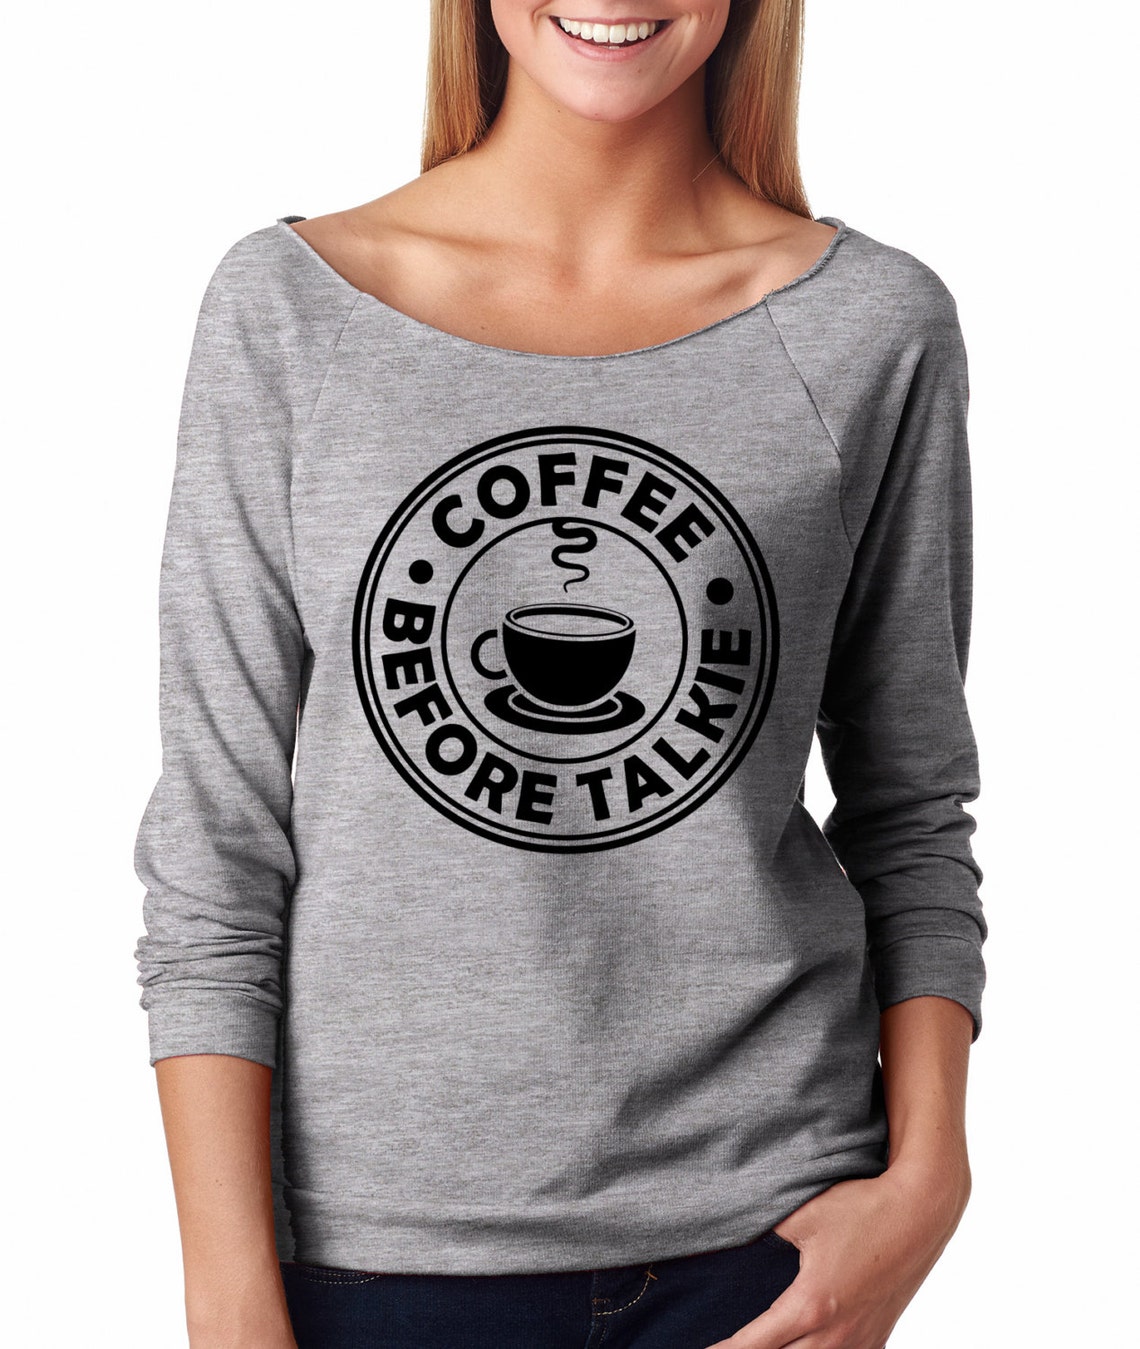 Stylish French Terry Raglan Funny Coffee Top Gift For Coffee | Etsy